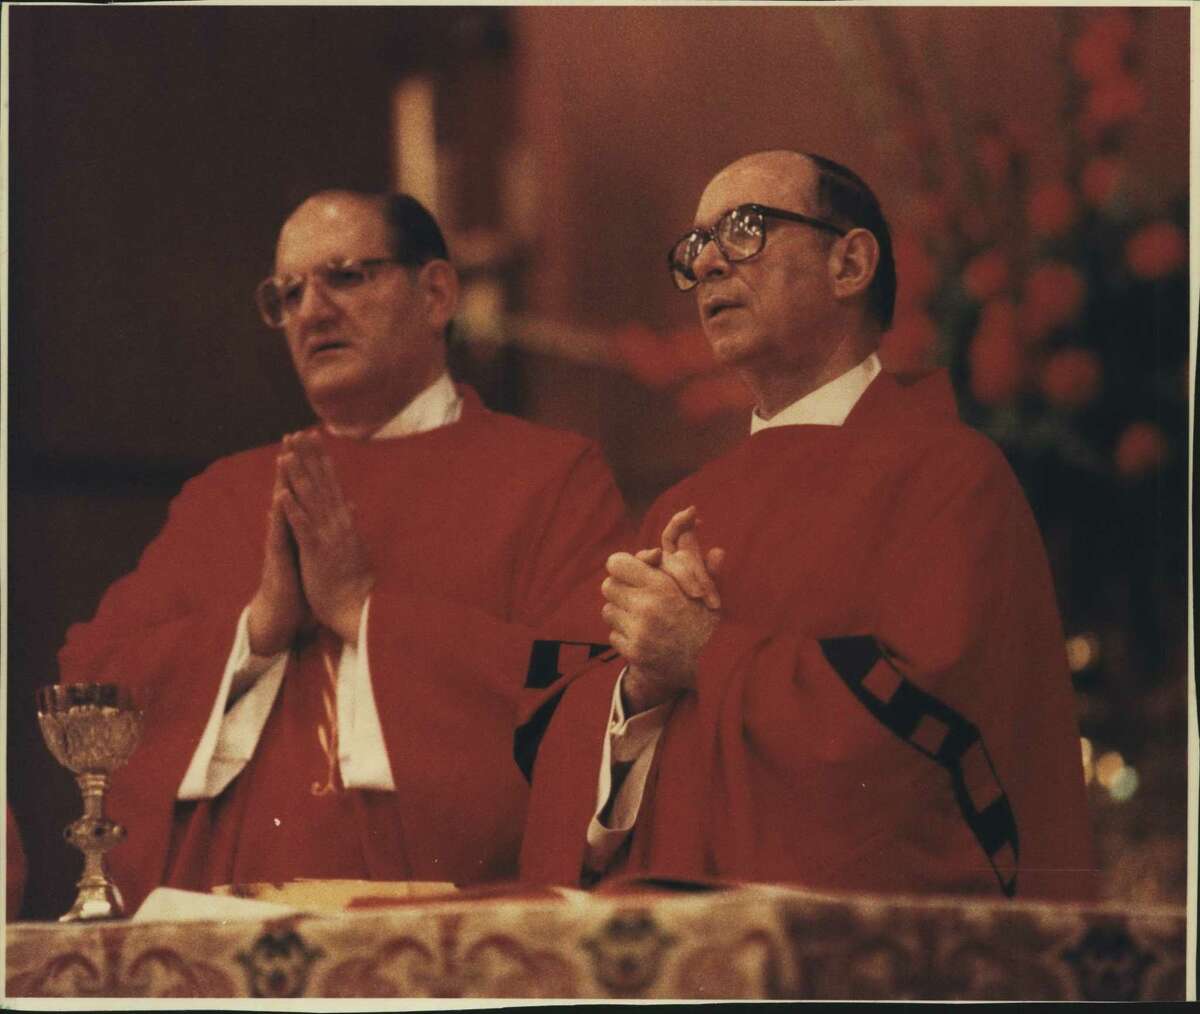 Similar to the way Houston Bishop Joseph Fiorenza, left, and Chicago Cardinal Joseph Bernardin con-celebrated a recent Mass in Houston, some 300 Catholic bishops will con-celebrate Mass daily during next week's conference. Houston, Texas